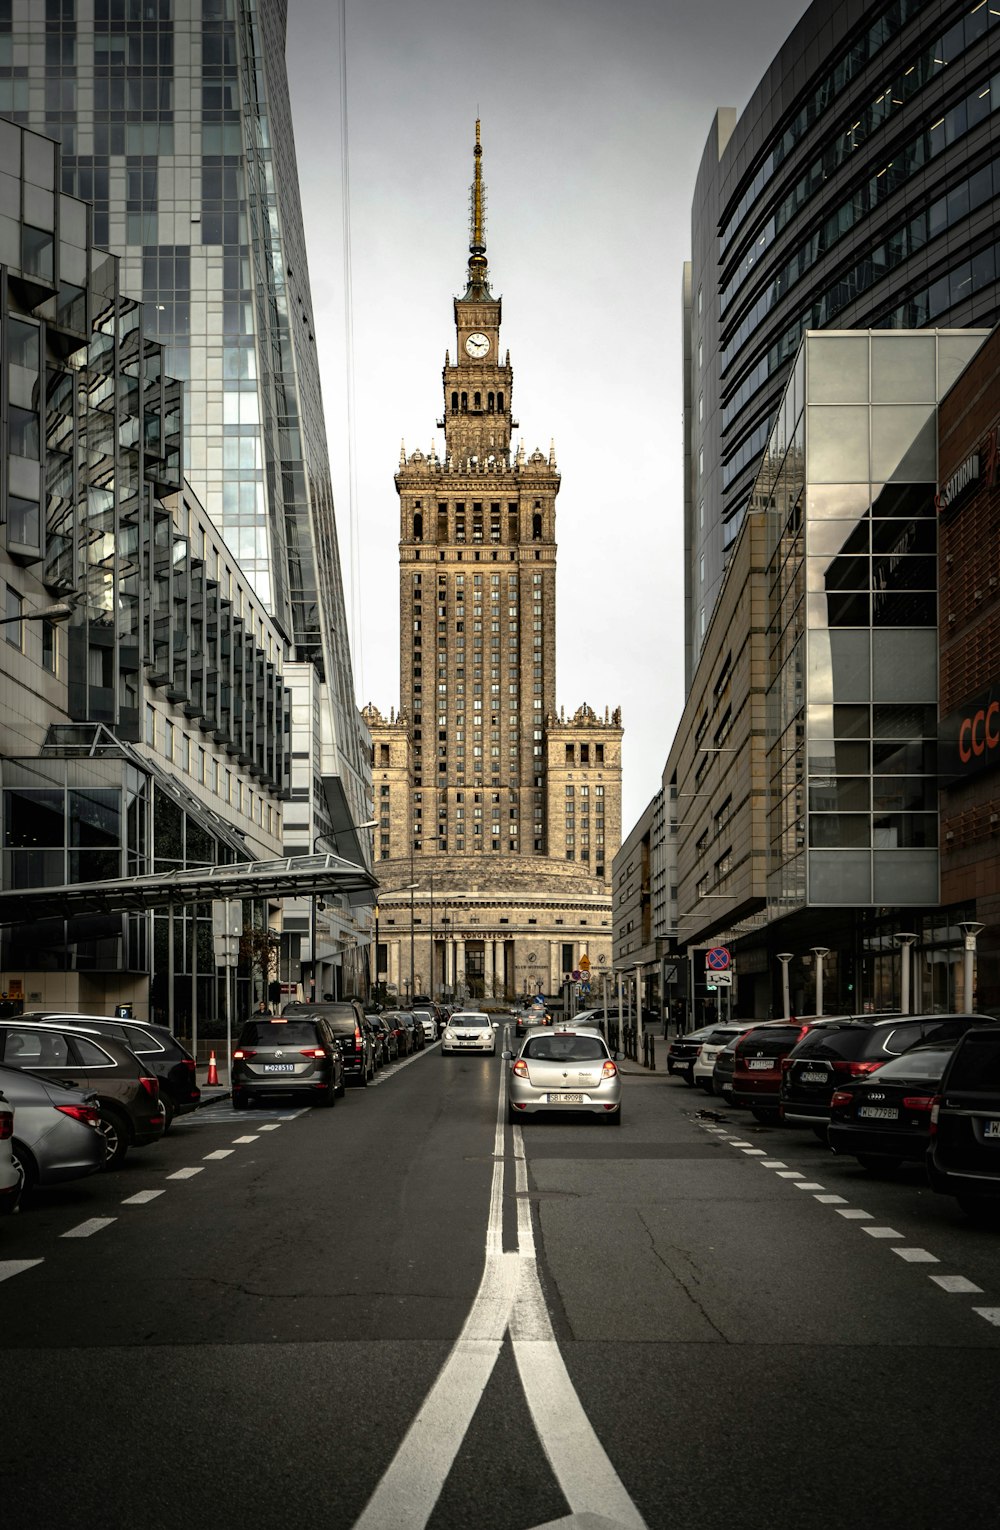 Palace of Culture and Science Building in Warsaw, Poland